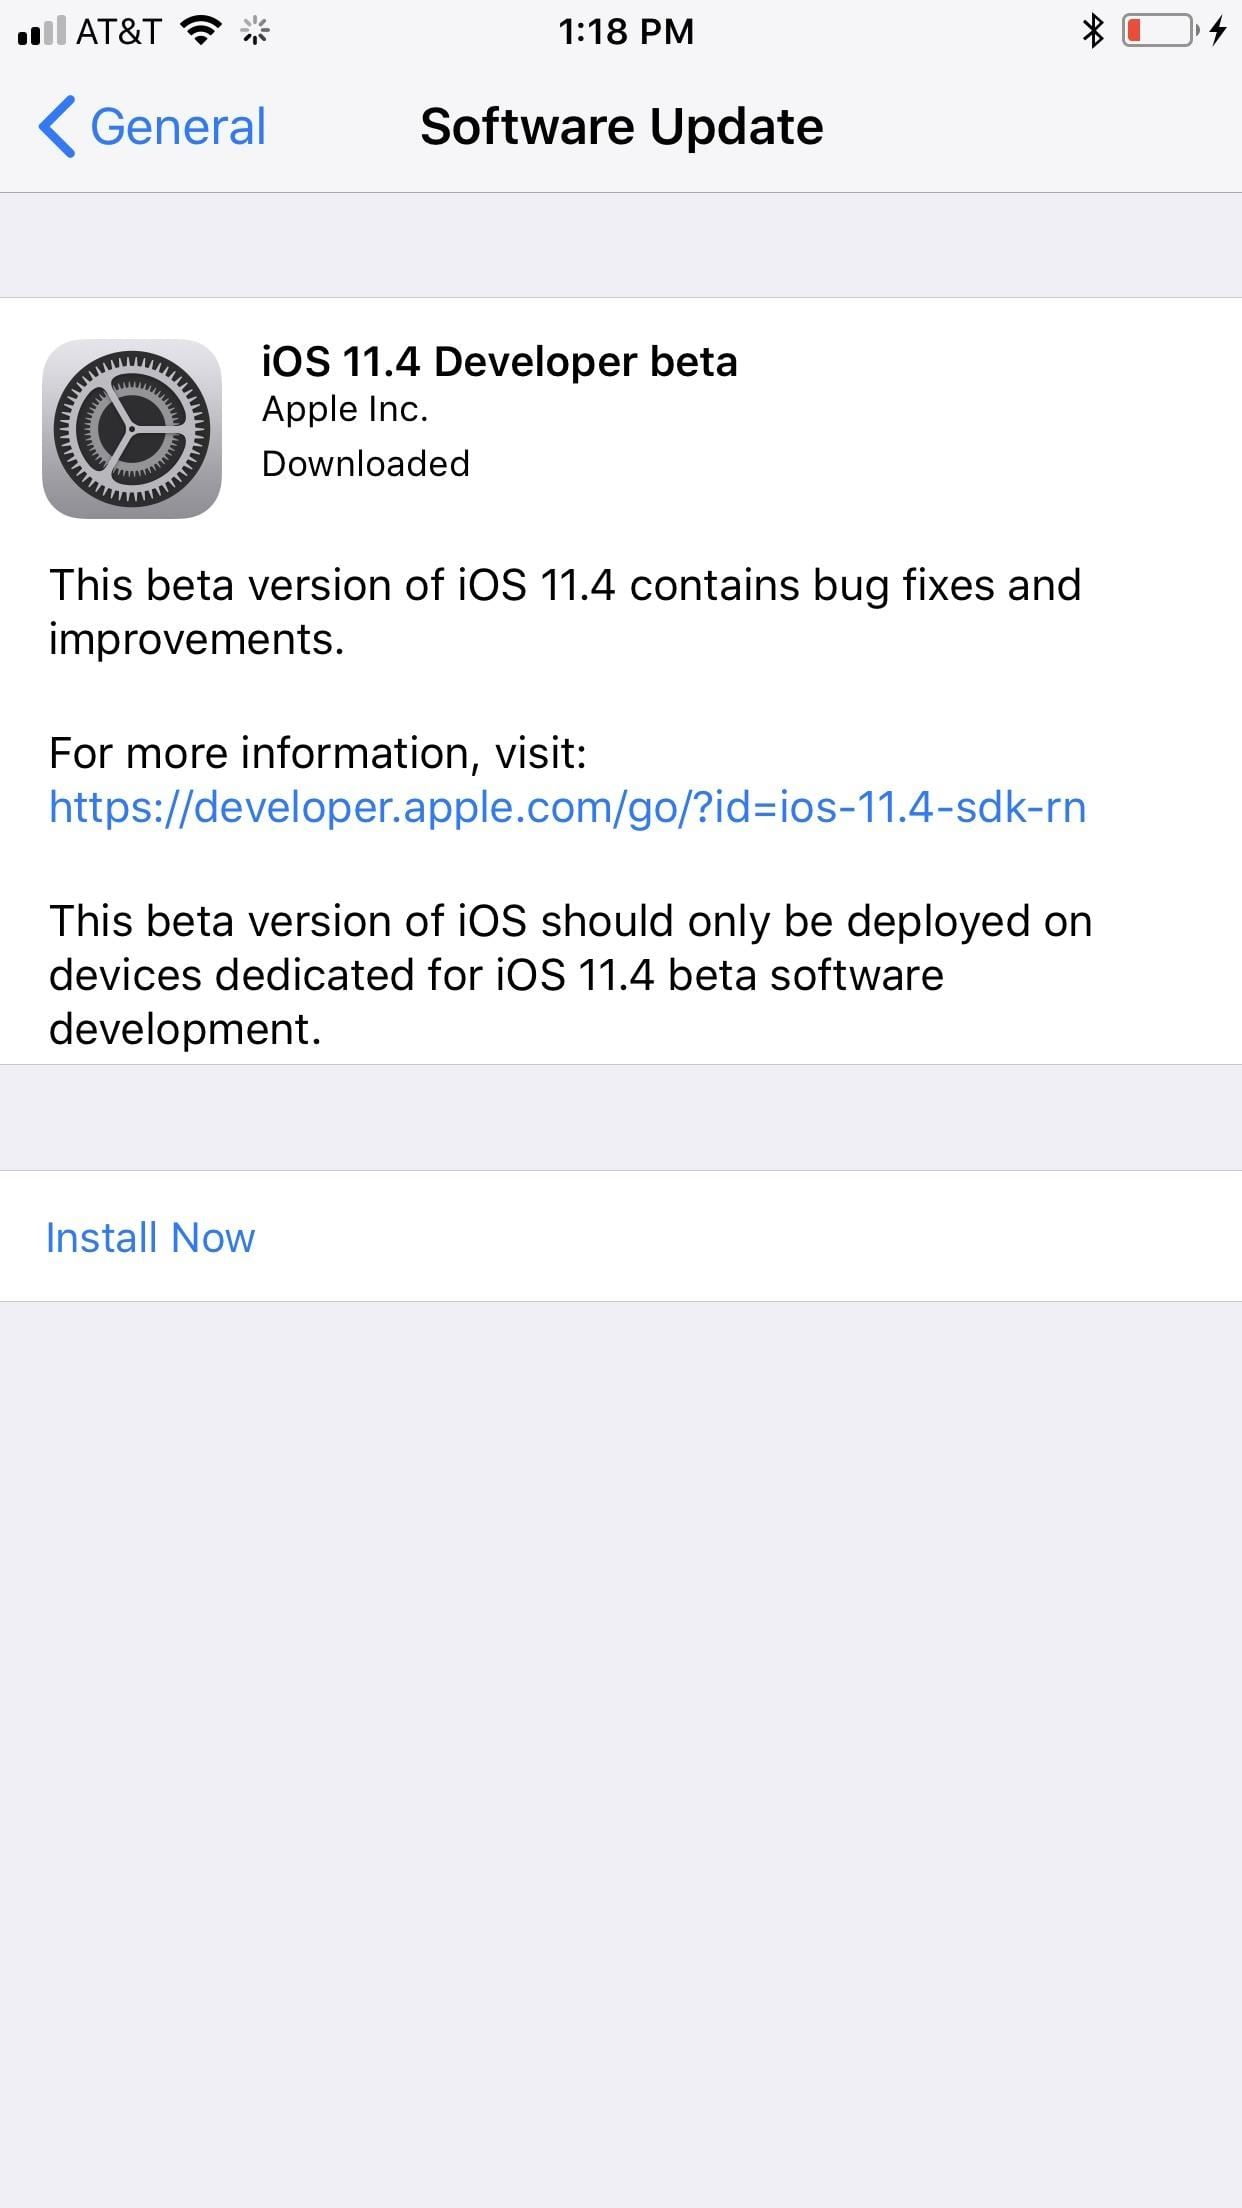 Apple releases first iOS 11.4 beta for developers